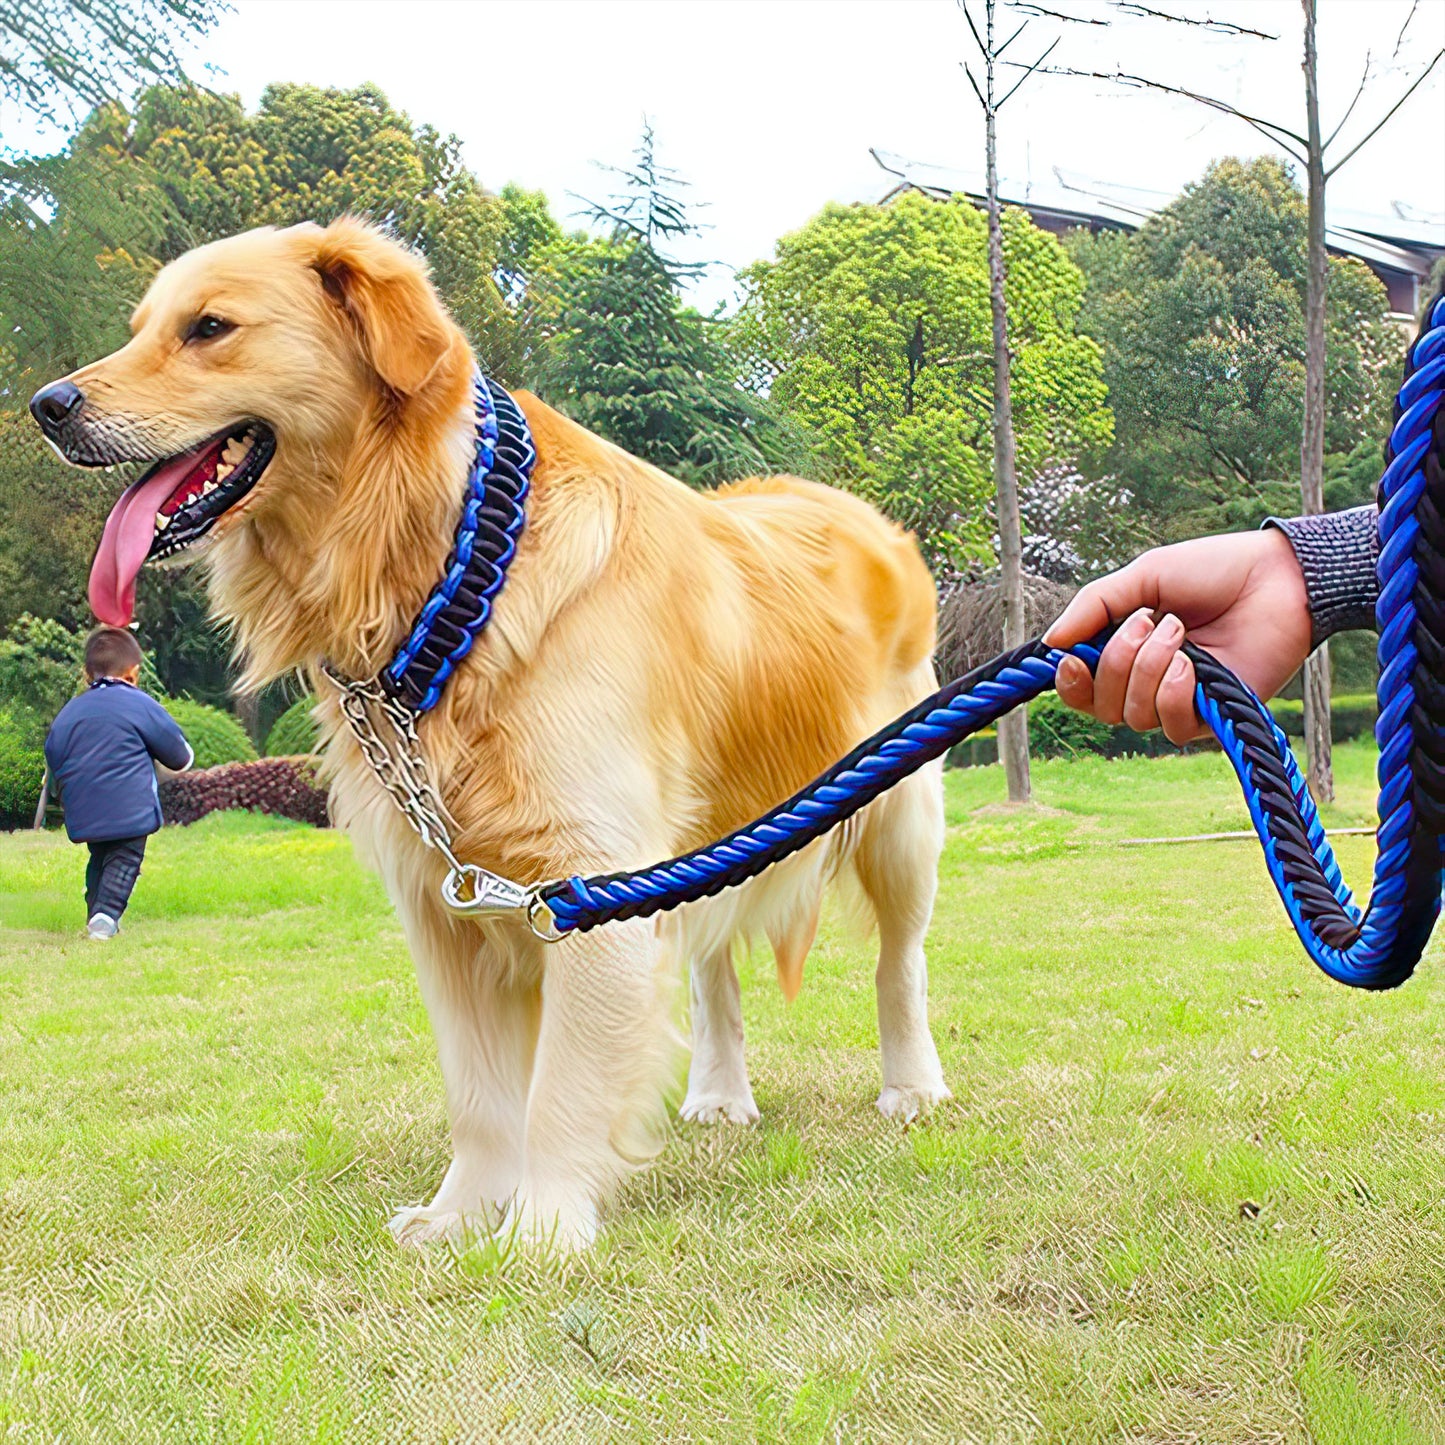 Heavy Duty Pet Leash with collar with smart Opening